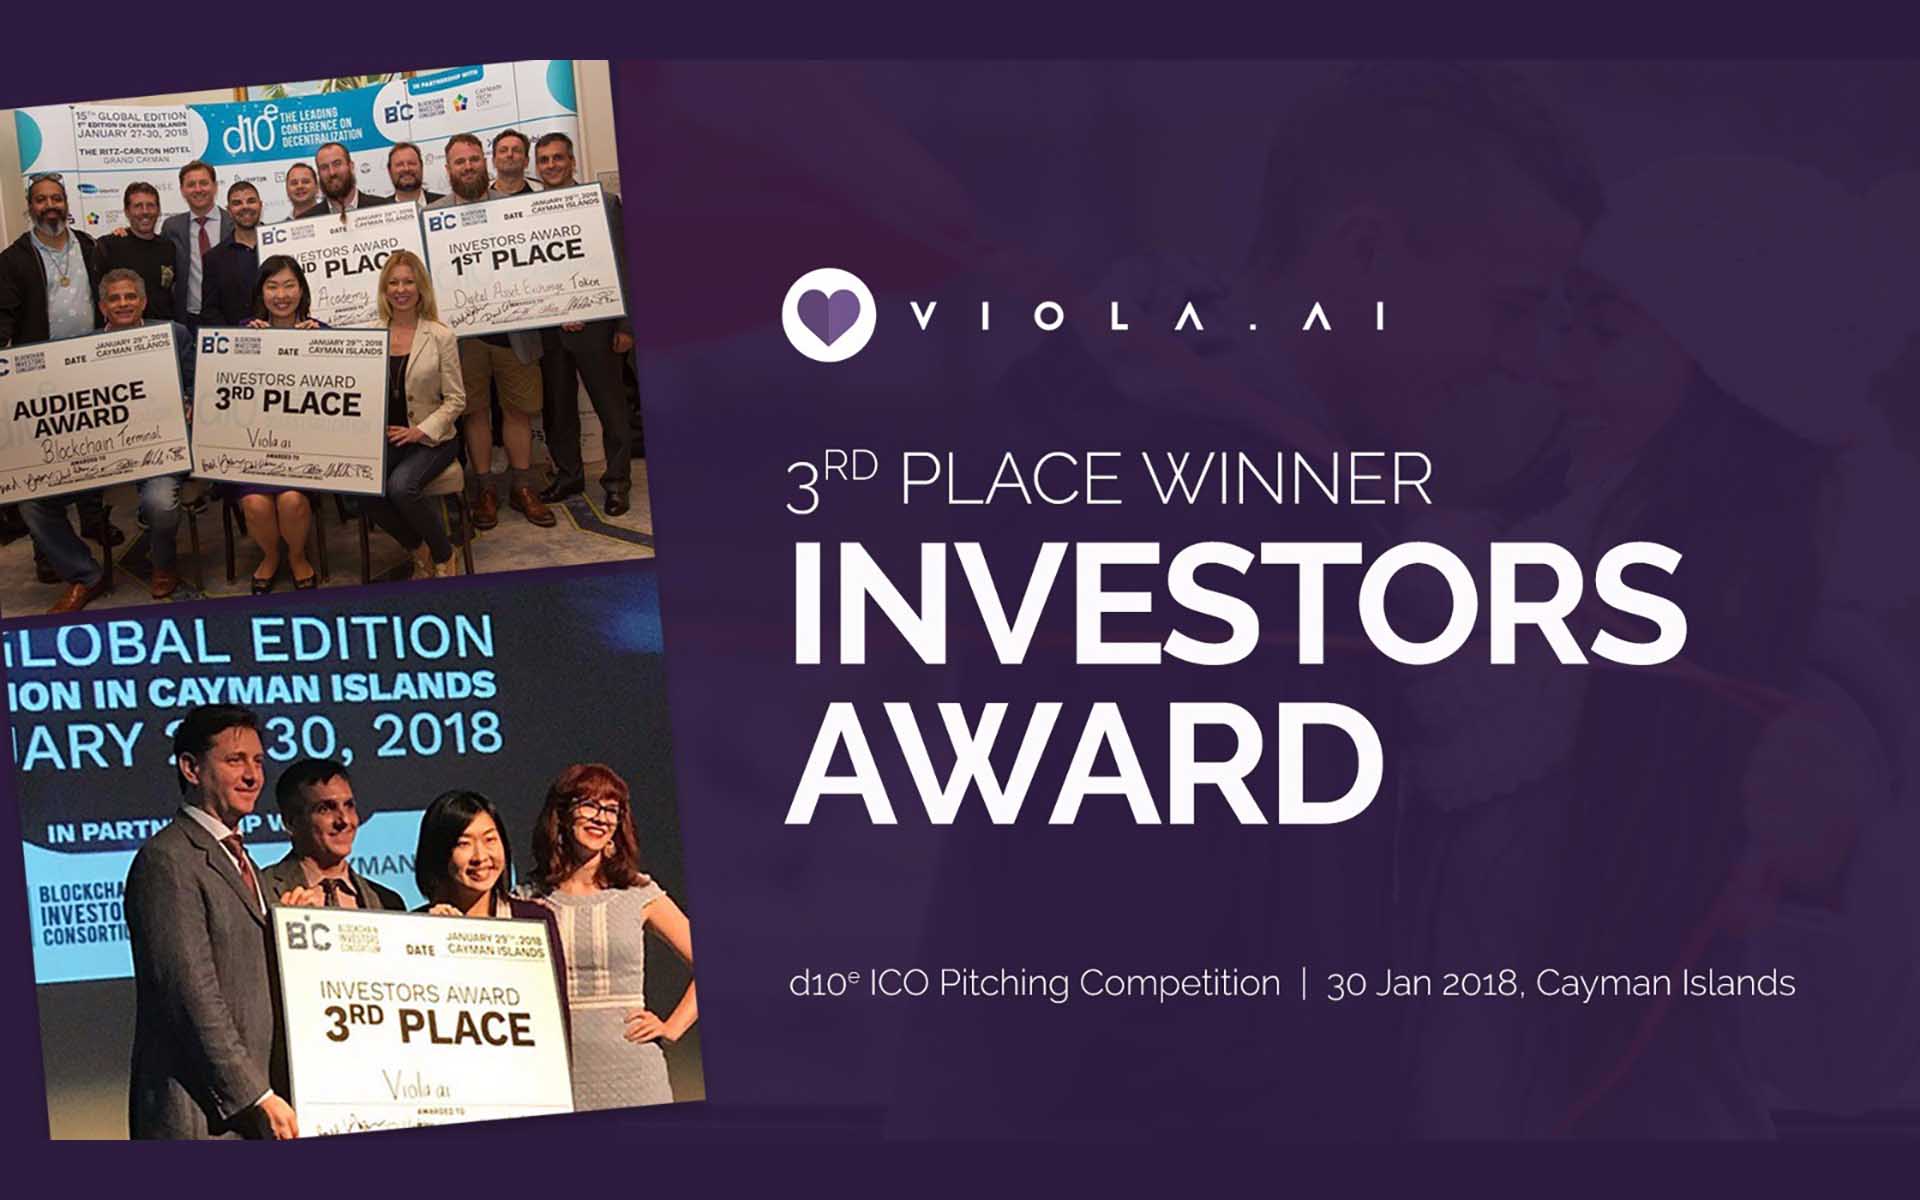 Viola.AI Wins Investor Award at d10e ICO Pitching Competition at Cayman Islands